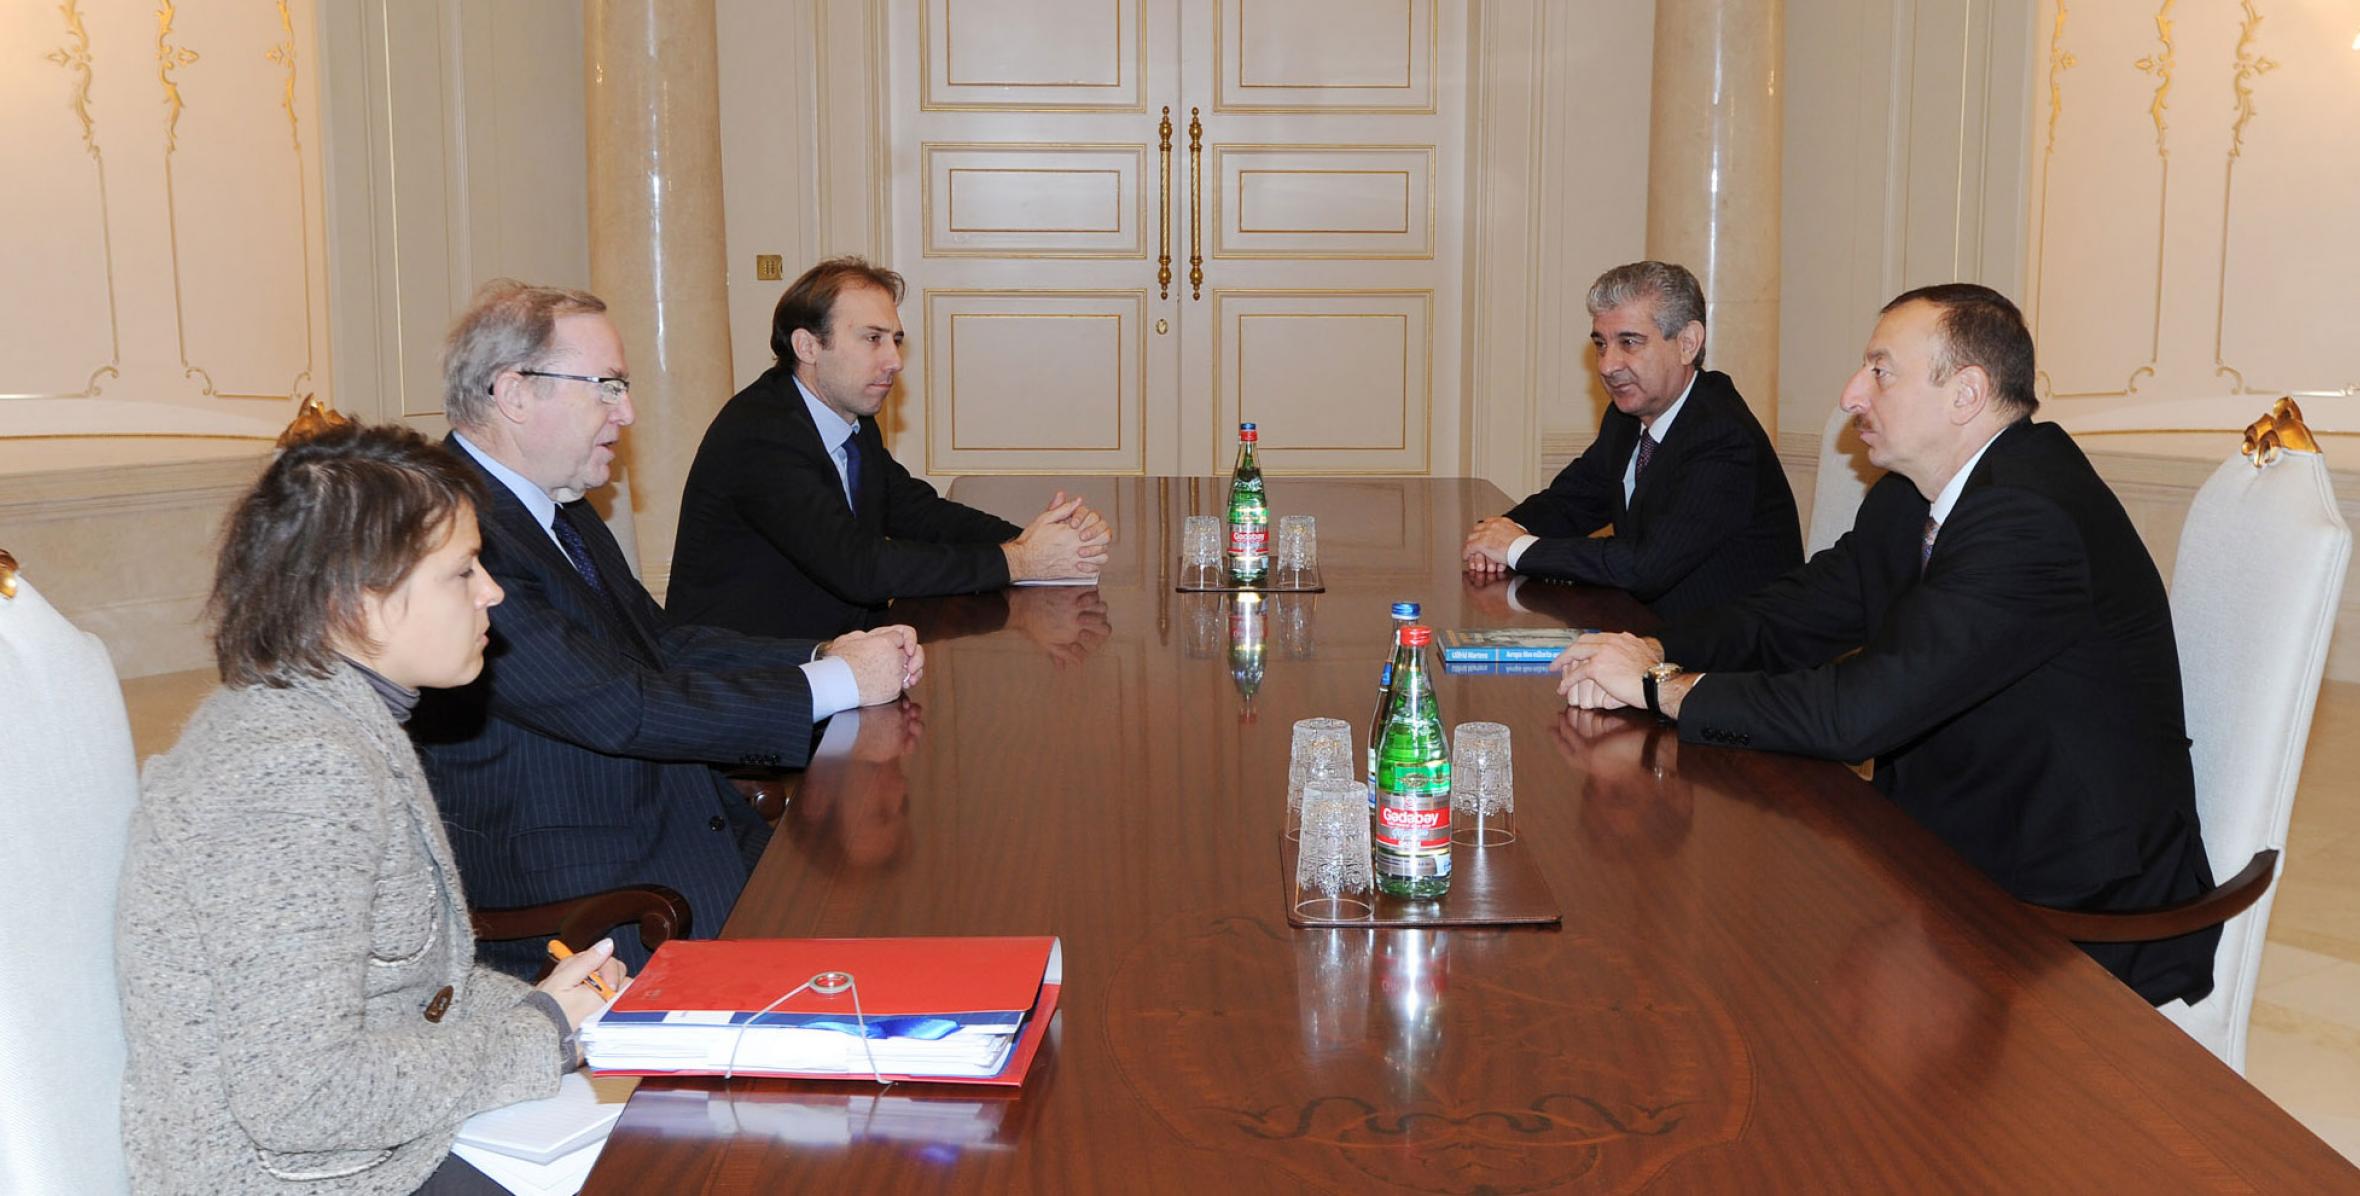 Ilham Aliyev received a delegation led by the President of the European People's Party, Wilfried Martens